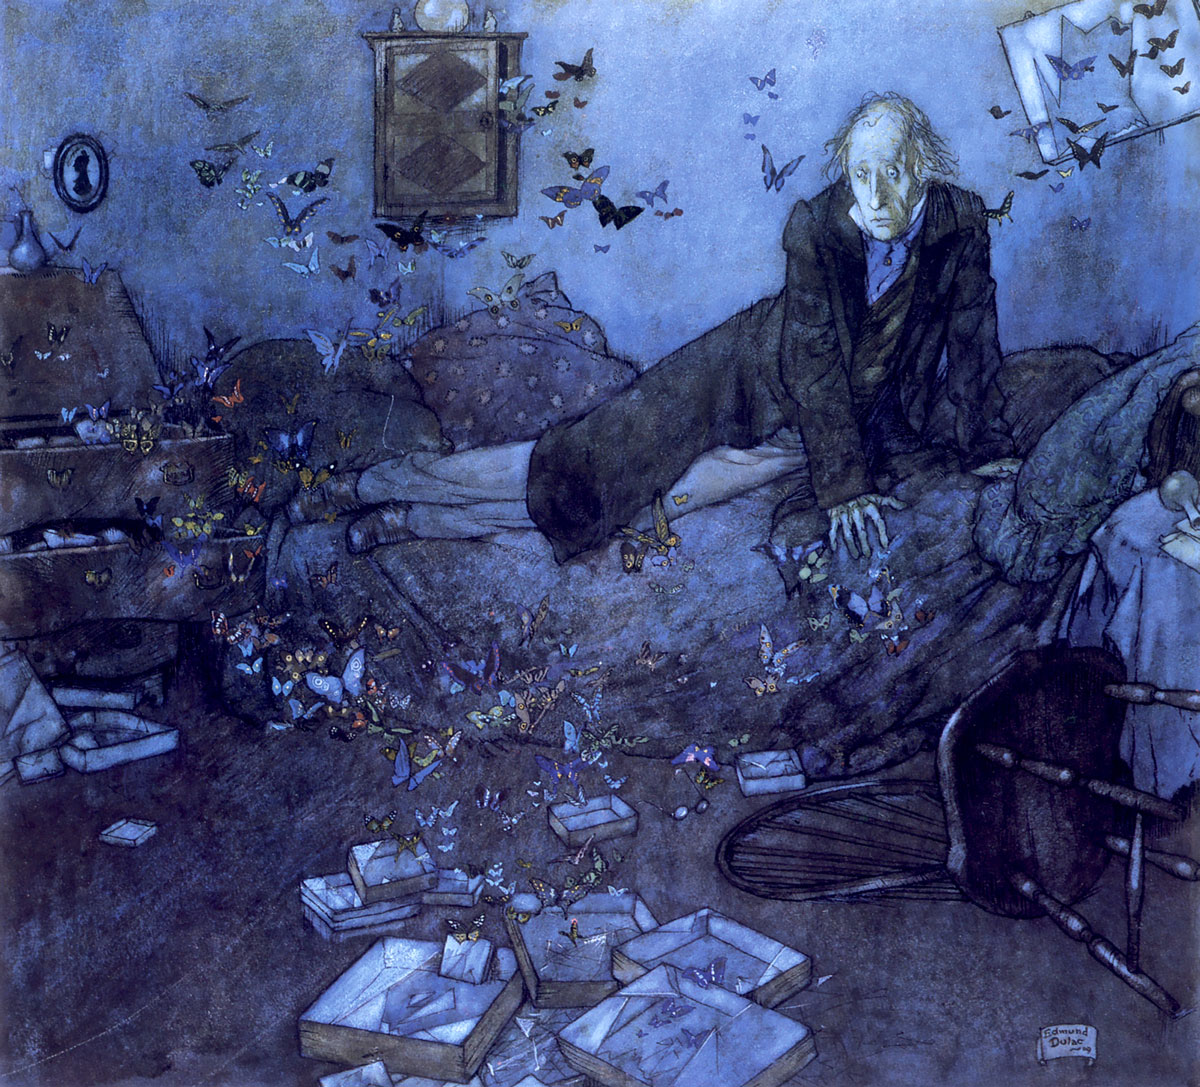 A 1909 watercolor painting by Edmund Dulac titled “The Entomologist’s Dream.” 